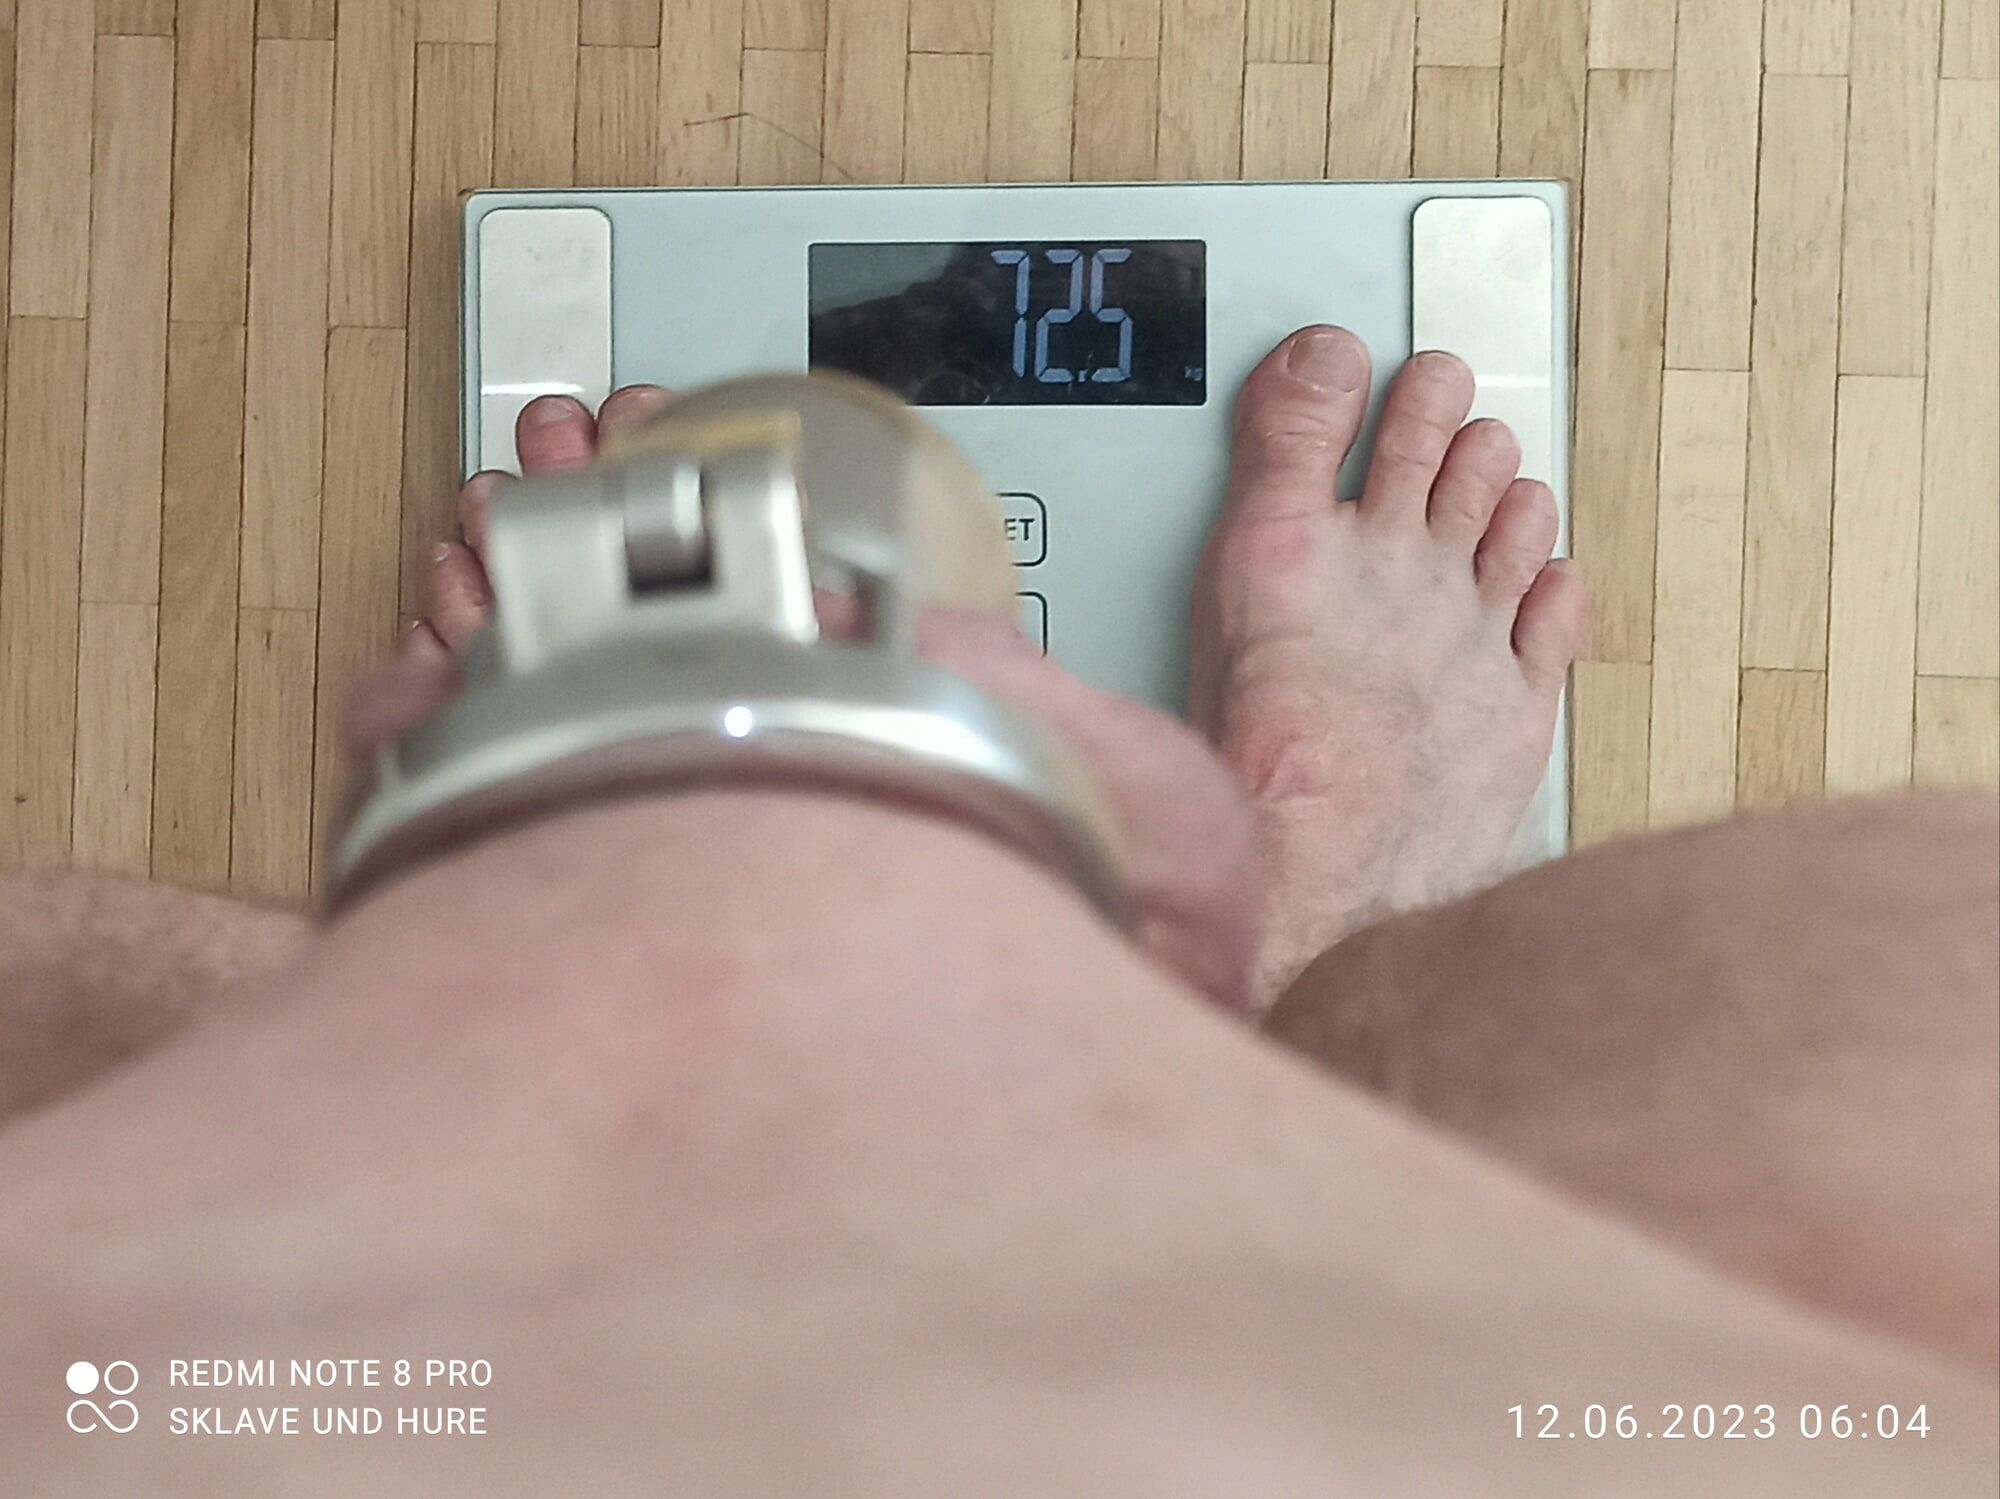 Naked weighing , cagecheck, humiliation 12.06.2023